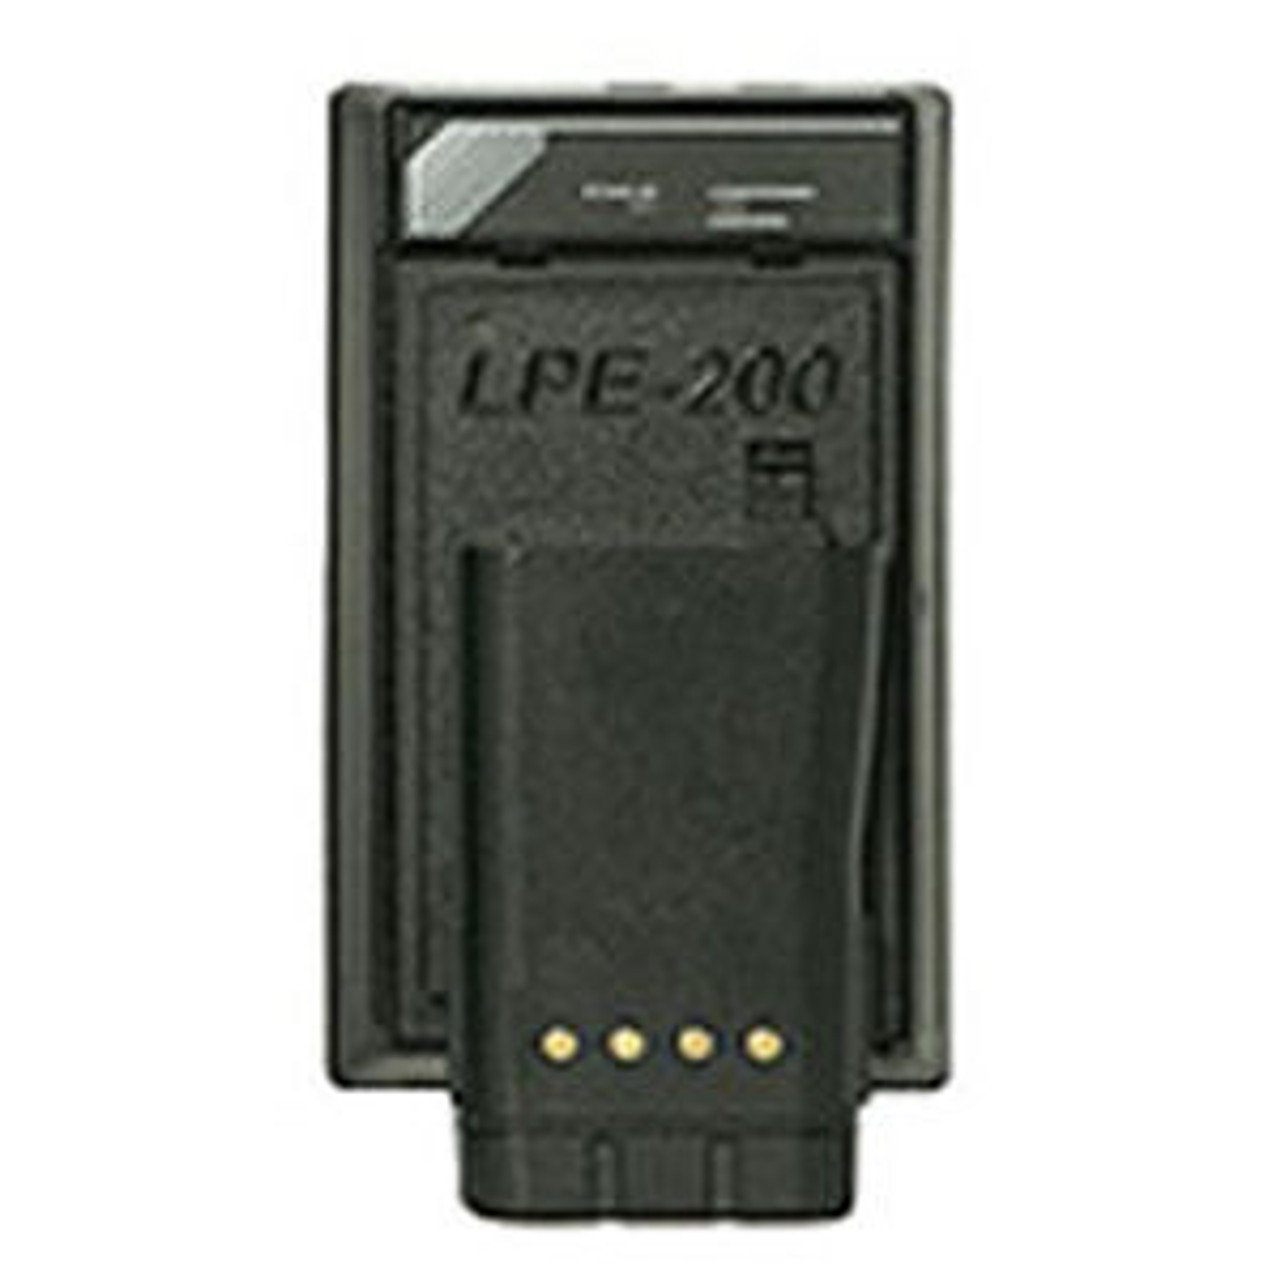 AdvanceTec Single Slot Conditioning Charger For ICOM IC-F3GS Lithium Batteries